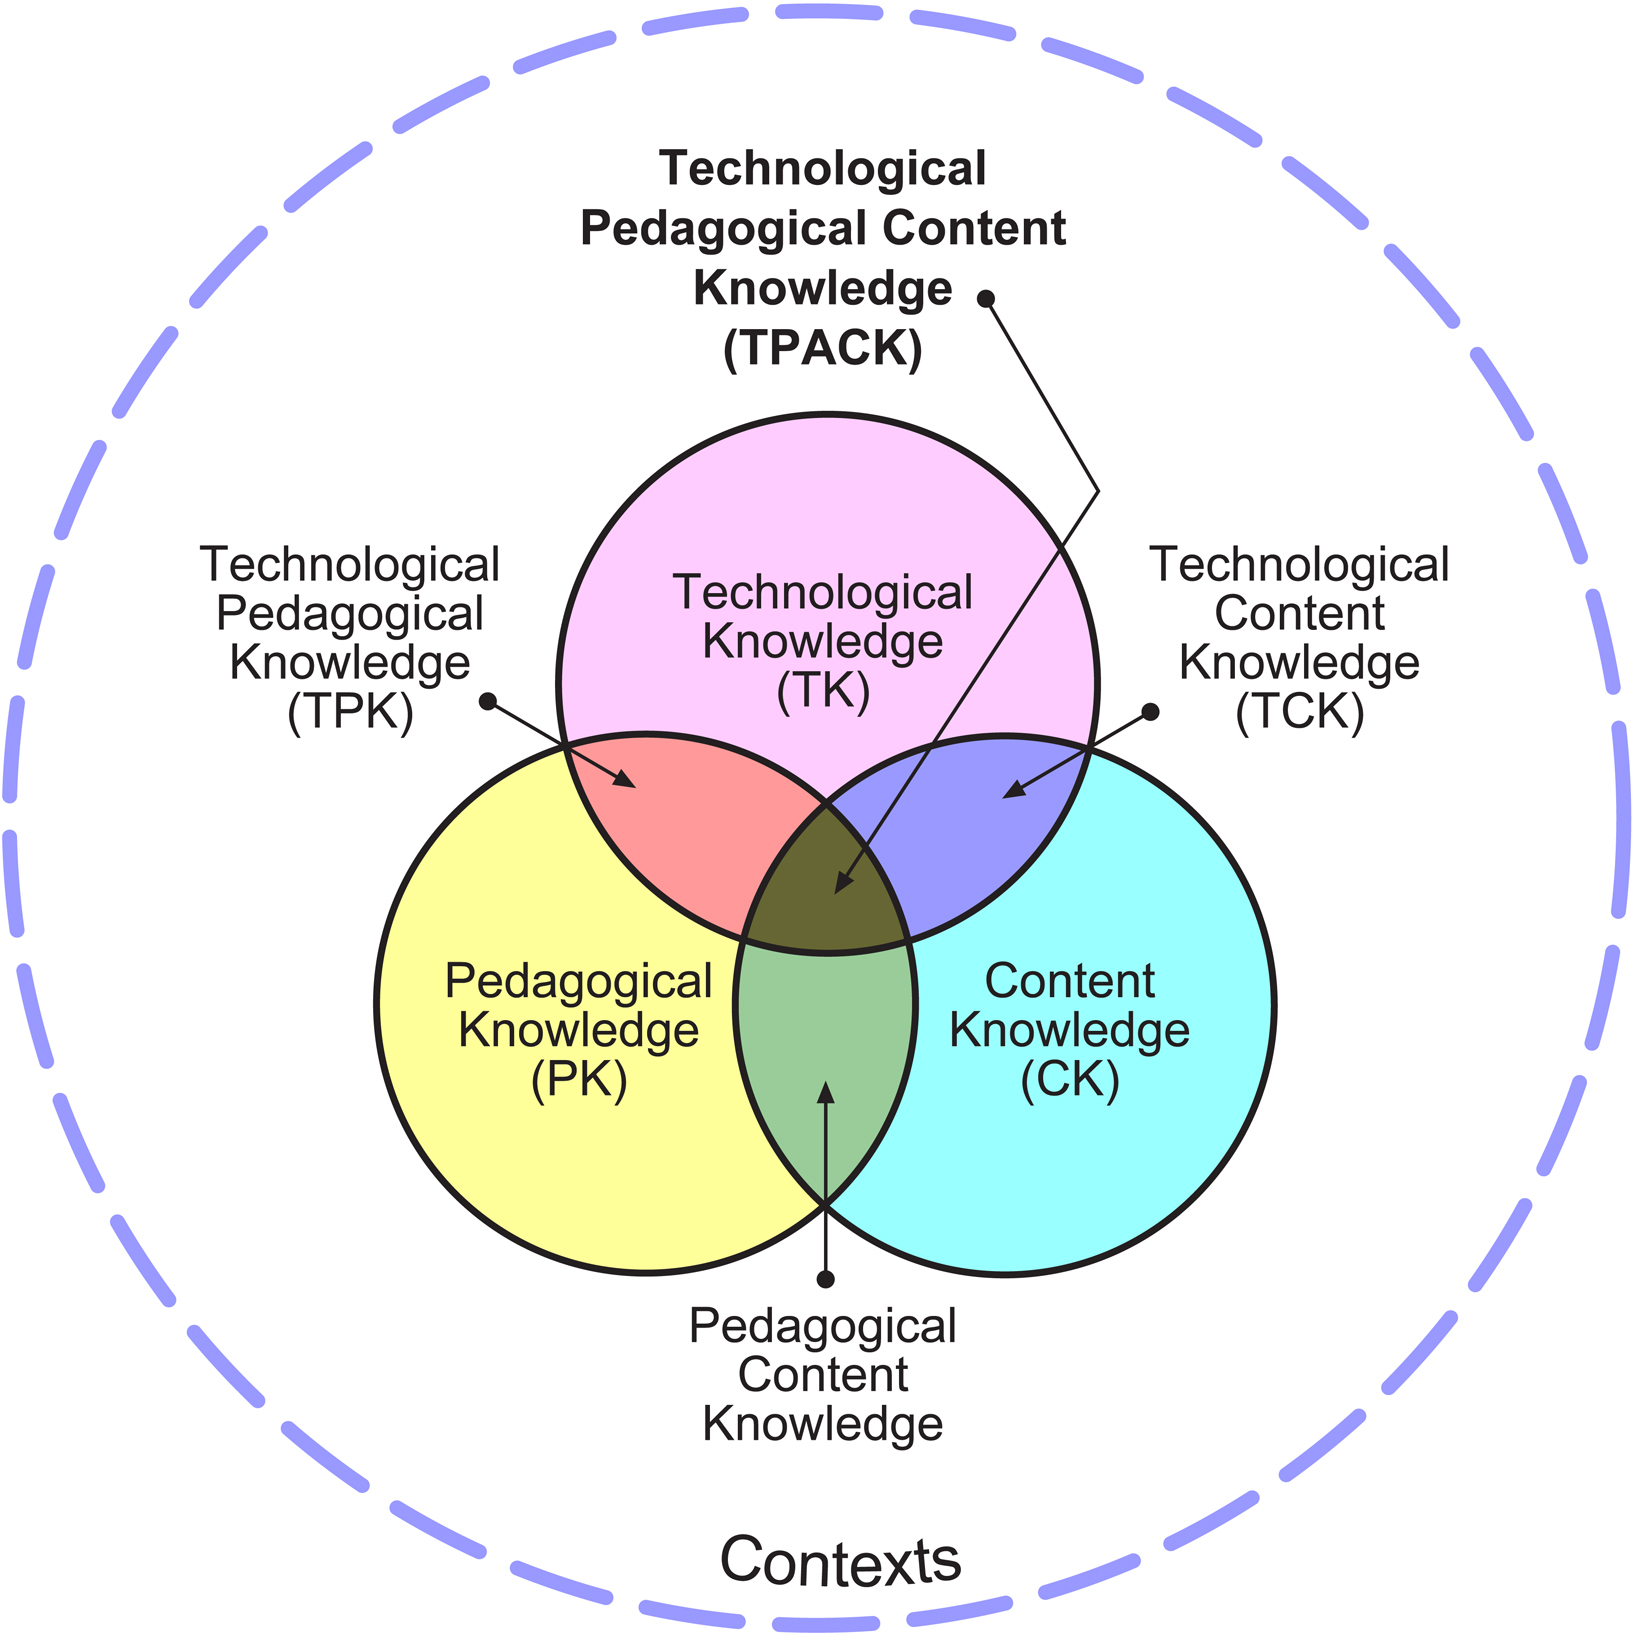 The TPACK Framework, reproduced by permission of the publisher, © 2012 by tpack.org